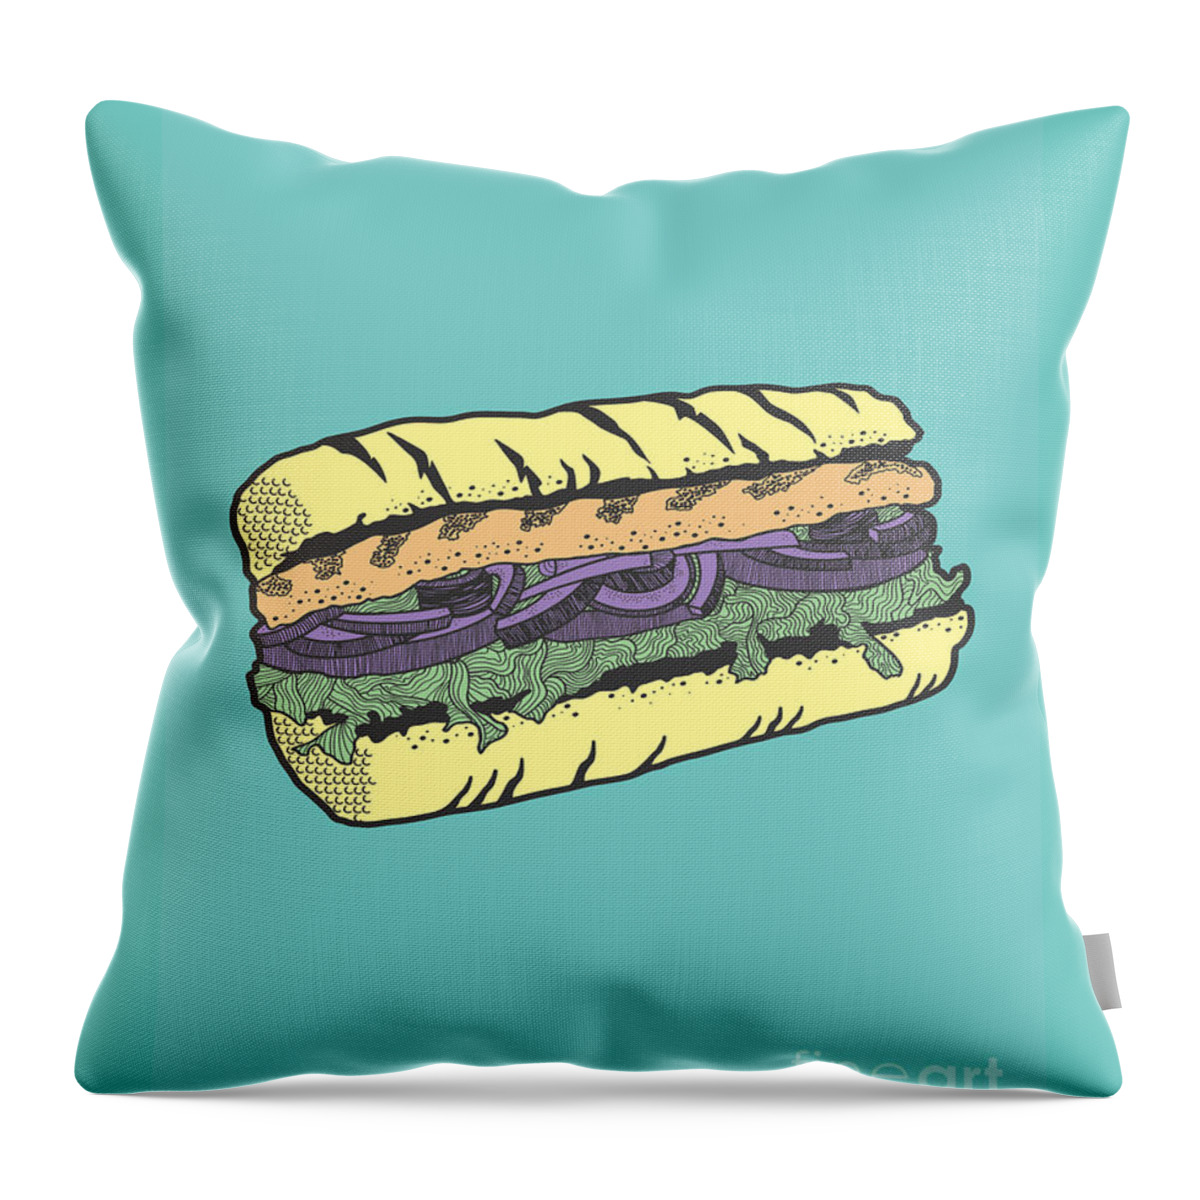 Sandwich Throw Pillow featuring the drawing Food masquerade by Freshinkstain